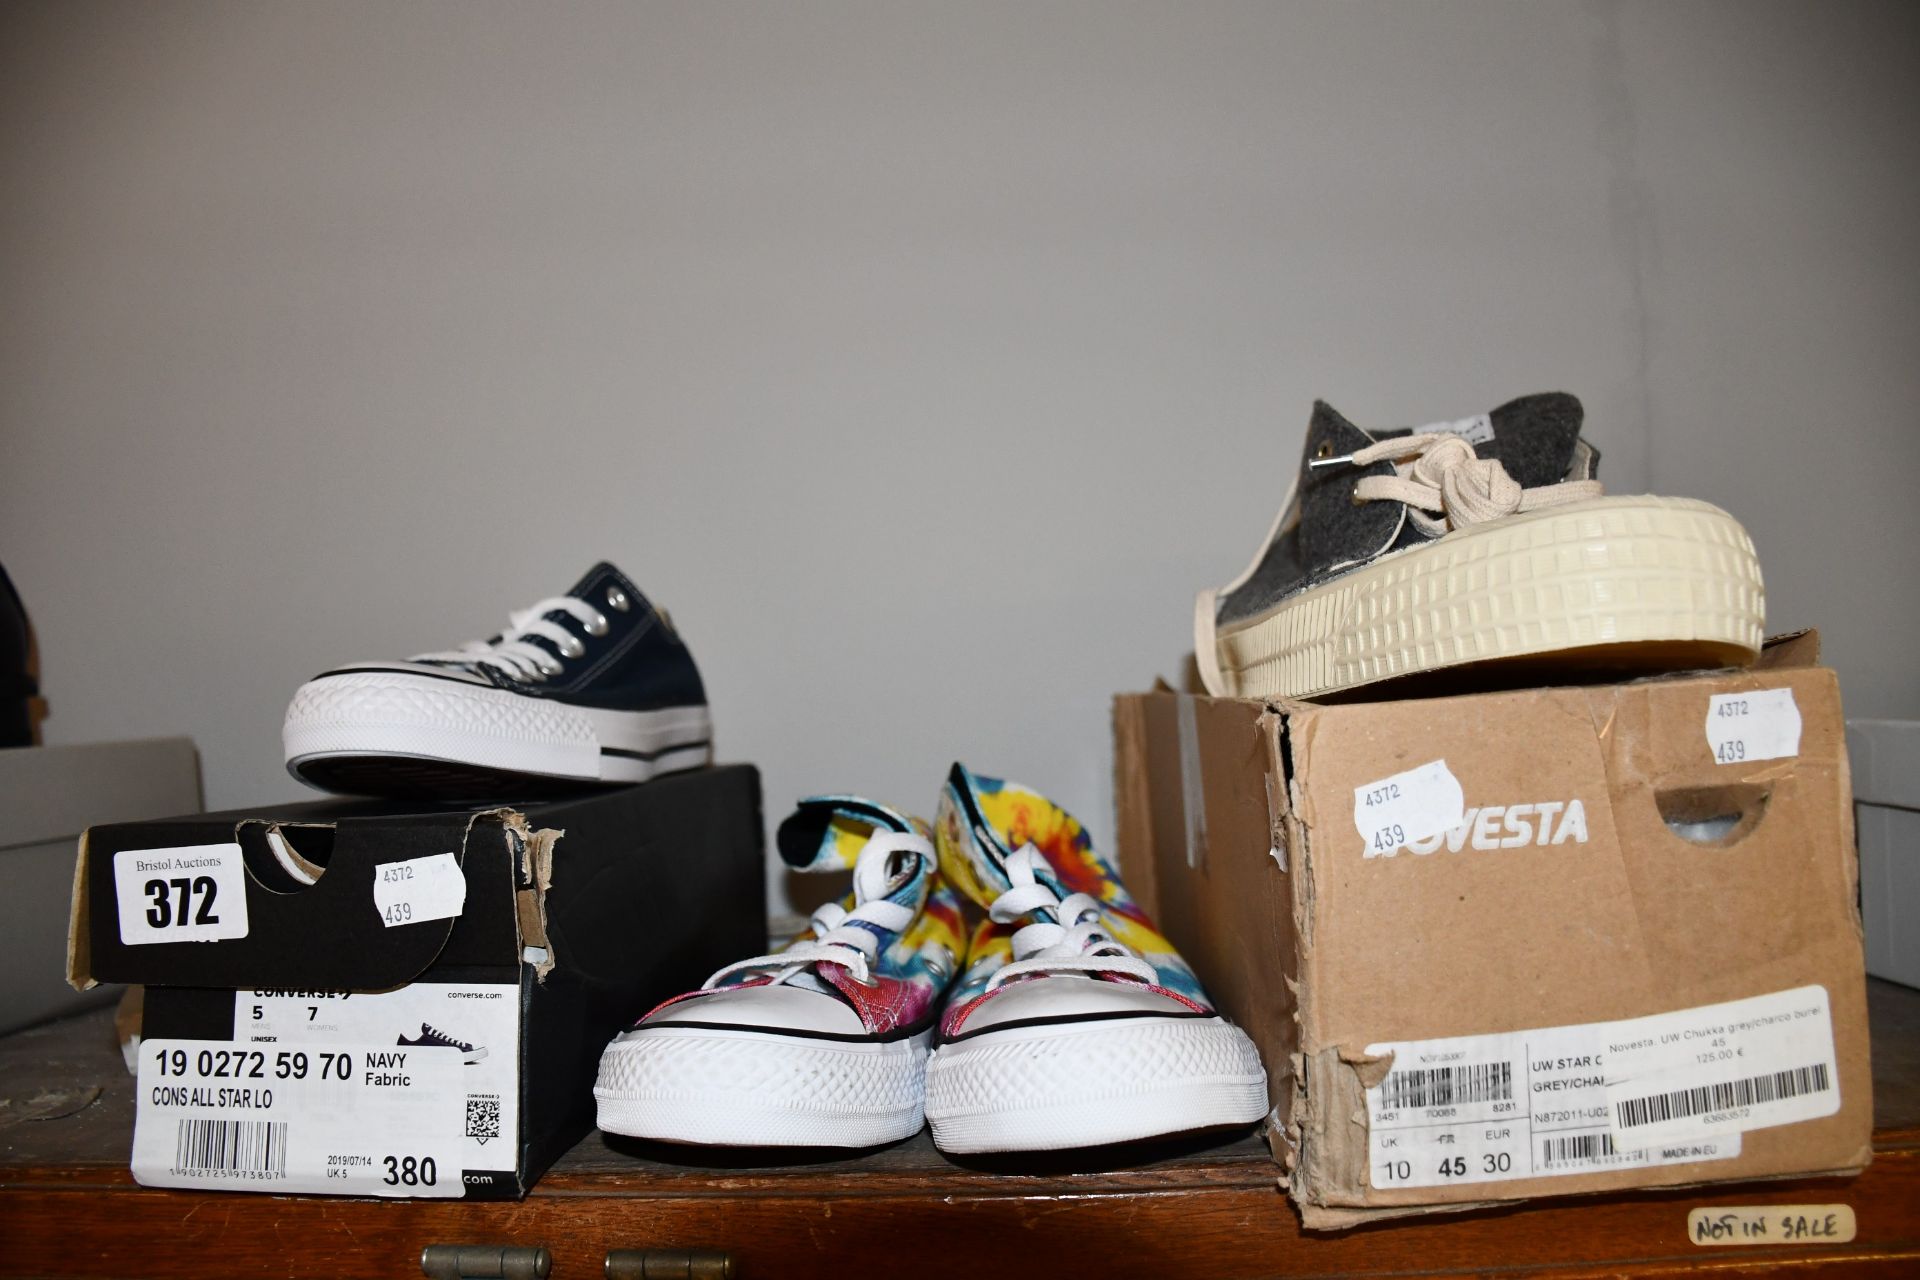 Two pairs of as new Converse canvas trainers (Both UK 5, one pair unboxed) and a pair of Universal